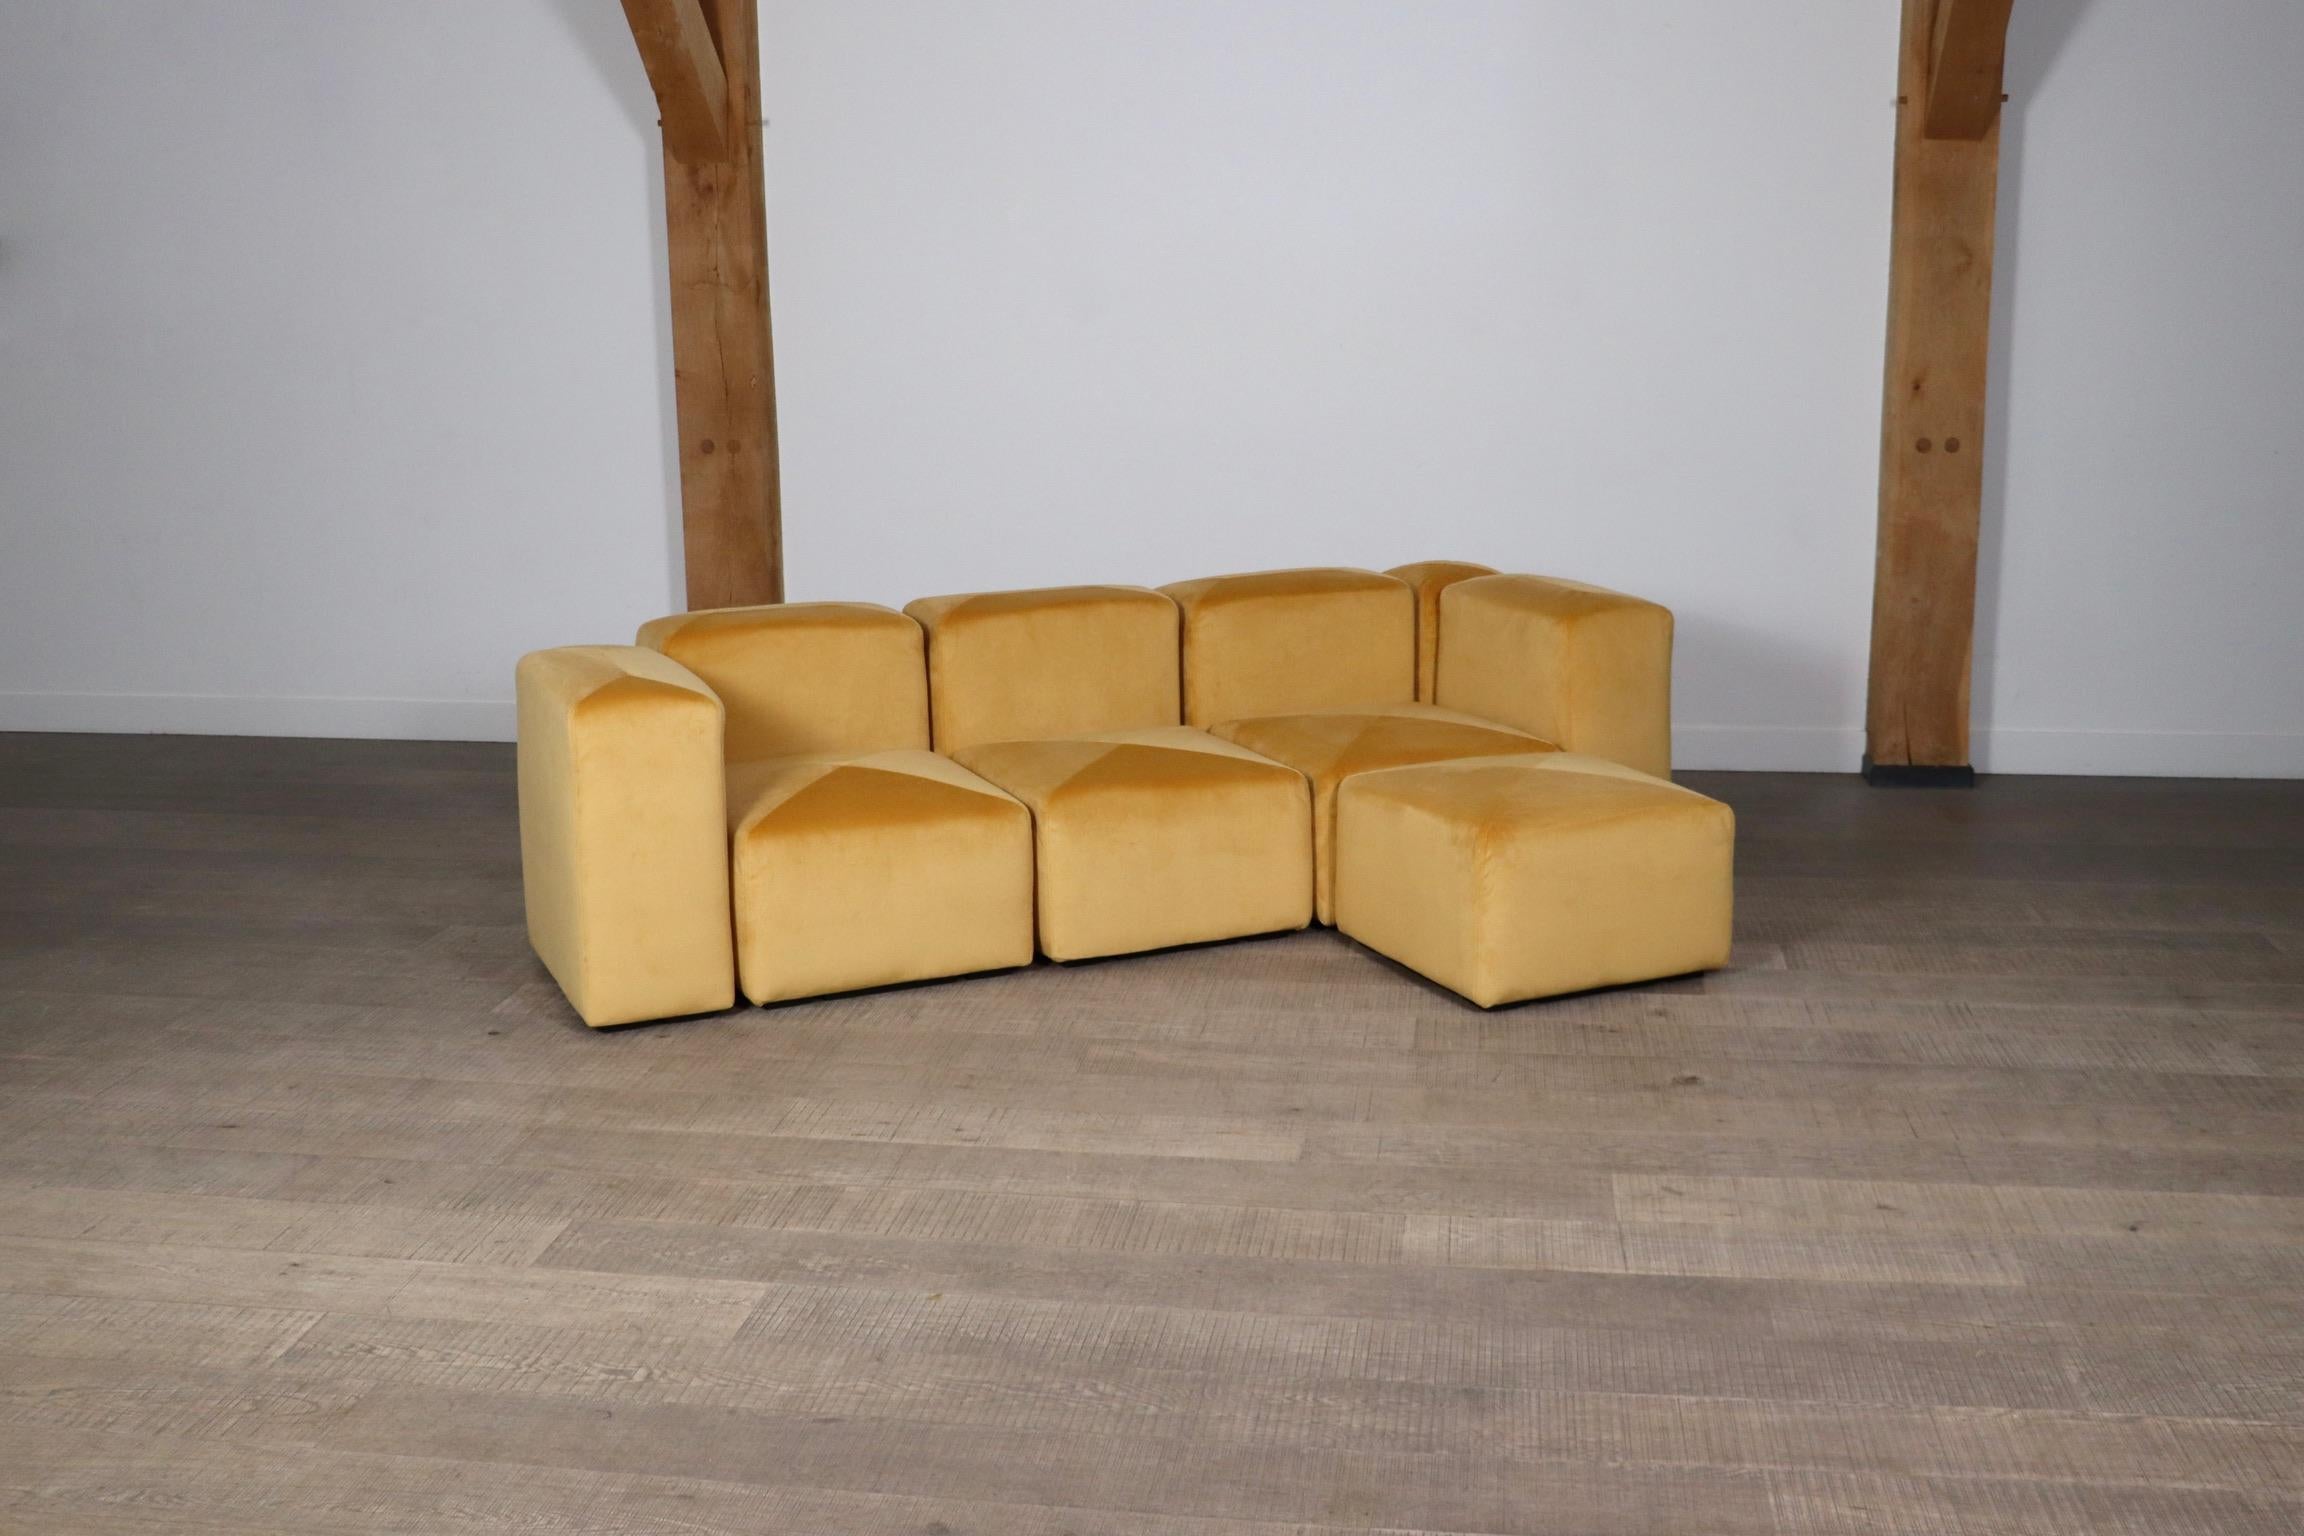 Beautiful modular ‘Sistema 61’ sofa by Giancarlo Piretti for Castelli, Italy 1970s.
This rare sofa design blends into any environment, due to its modularity. The modular sofa consists of four seatings, five back/armrests and one corner column, which